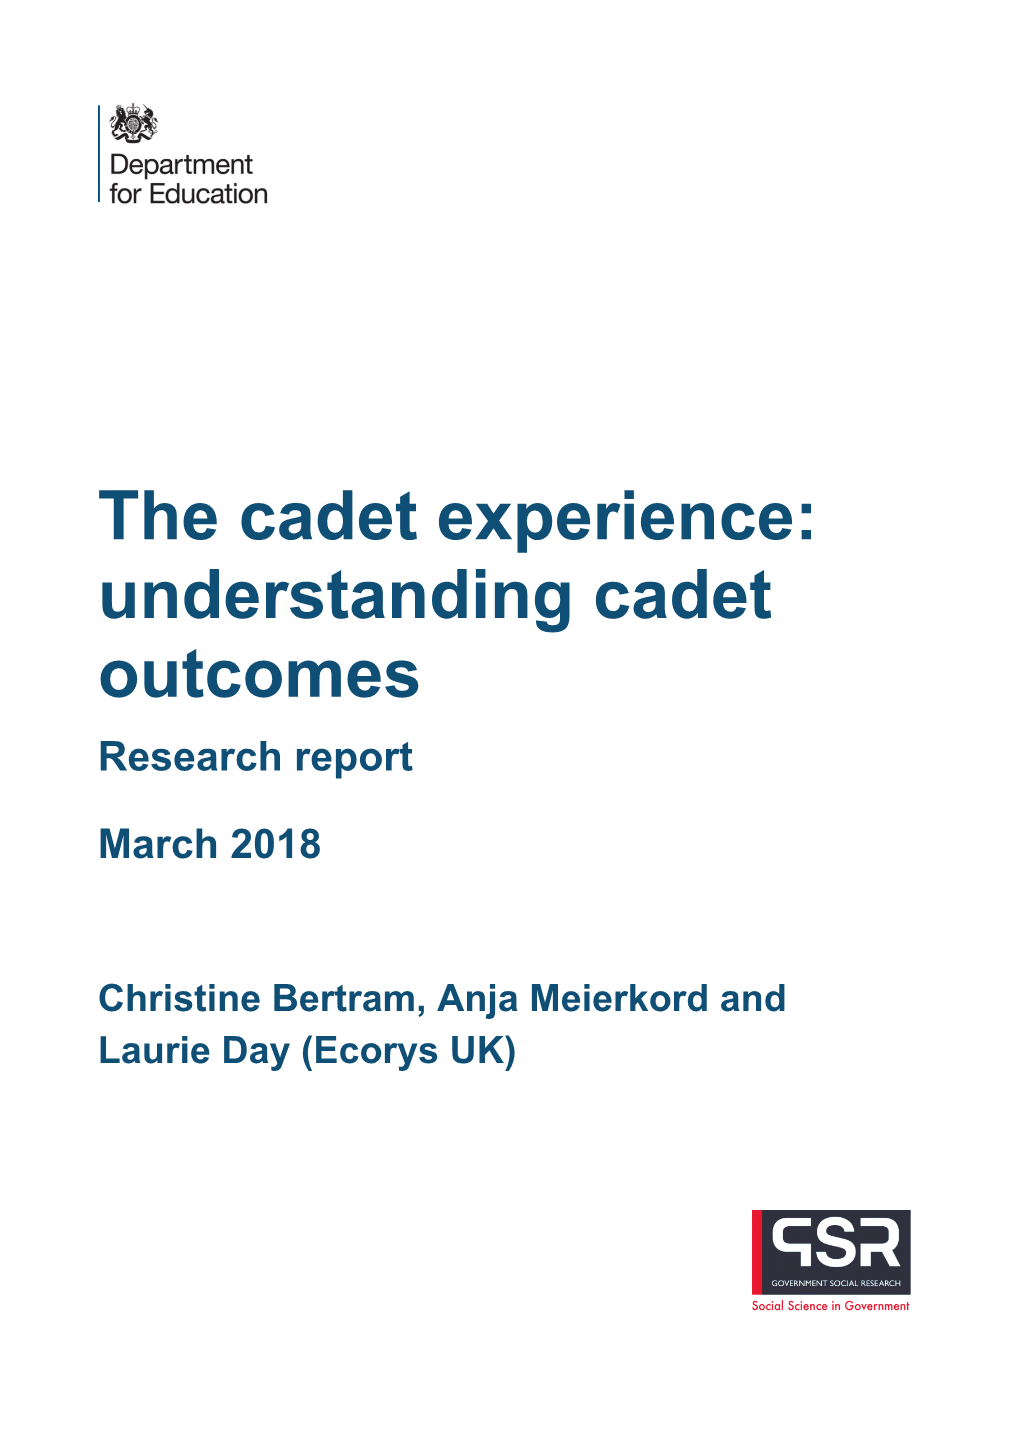 The Cadet Experience: Understanding Cadet Outcomes Research Report